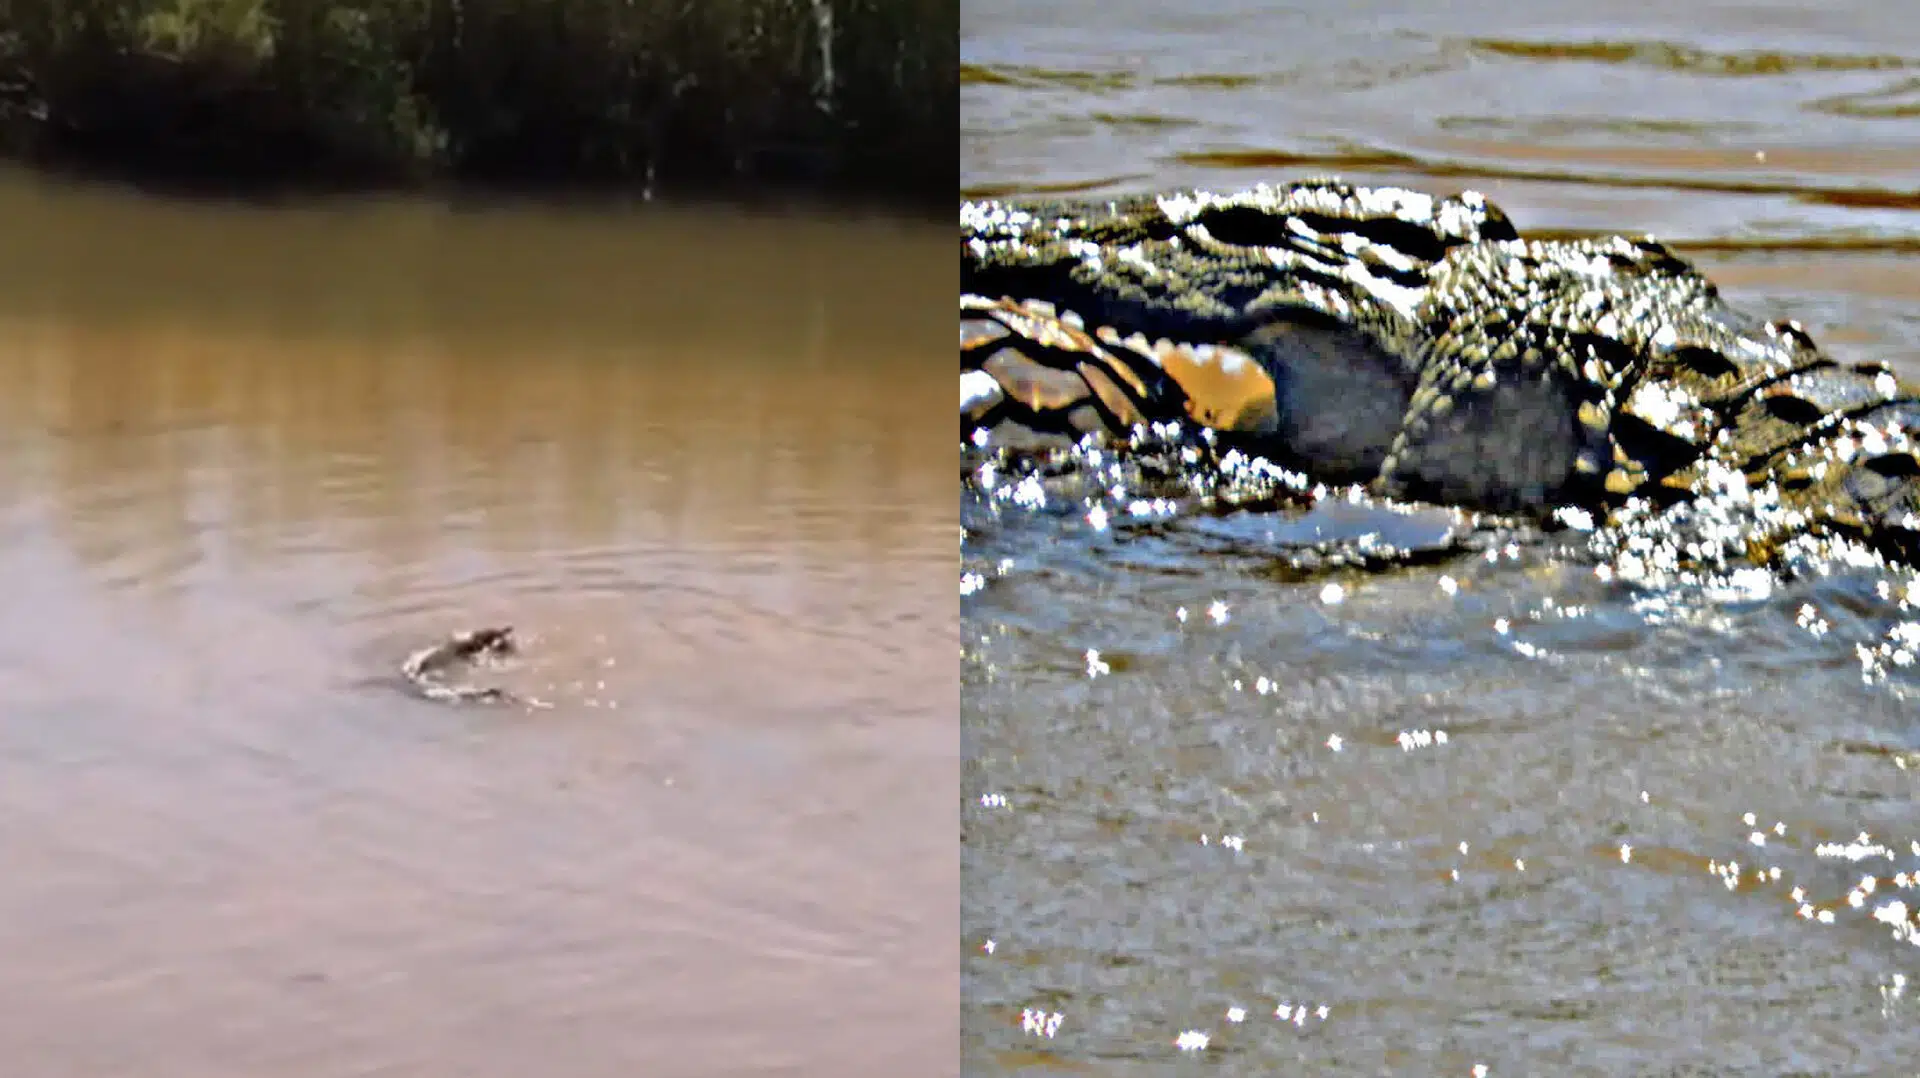 Crocodile Catches Pangolin in River (Extremely Rare Footage)